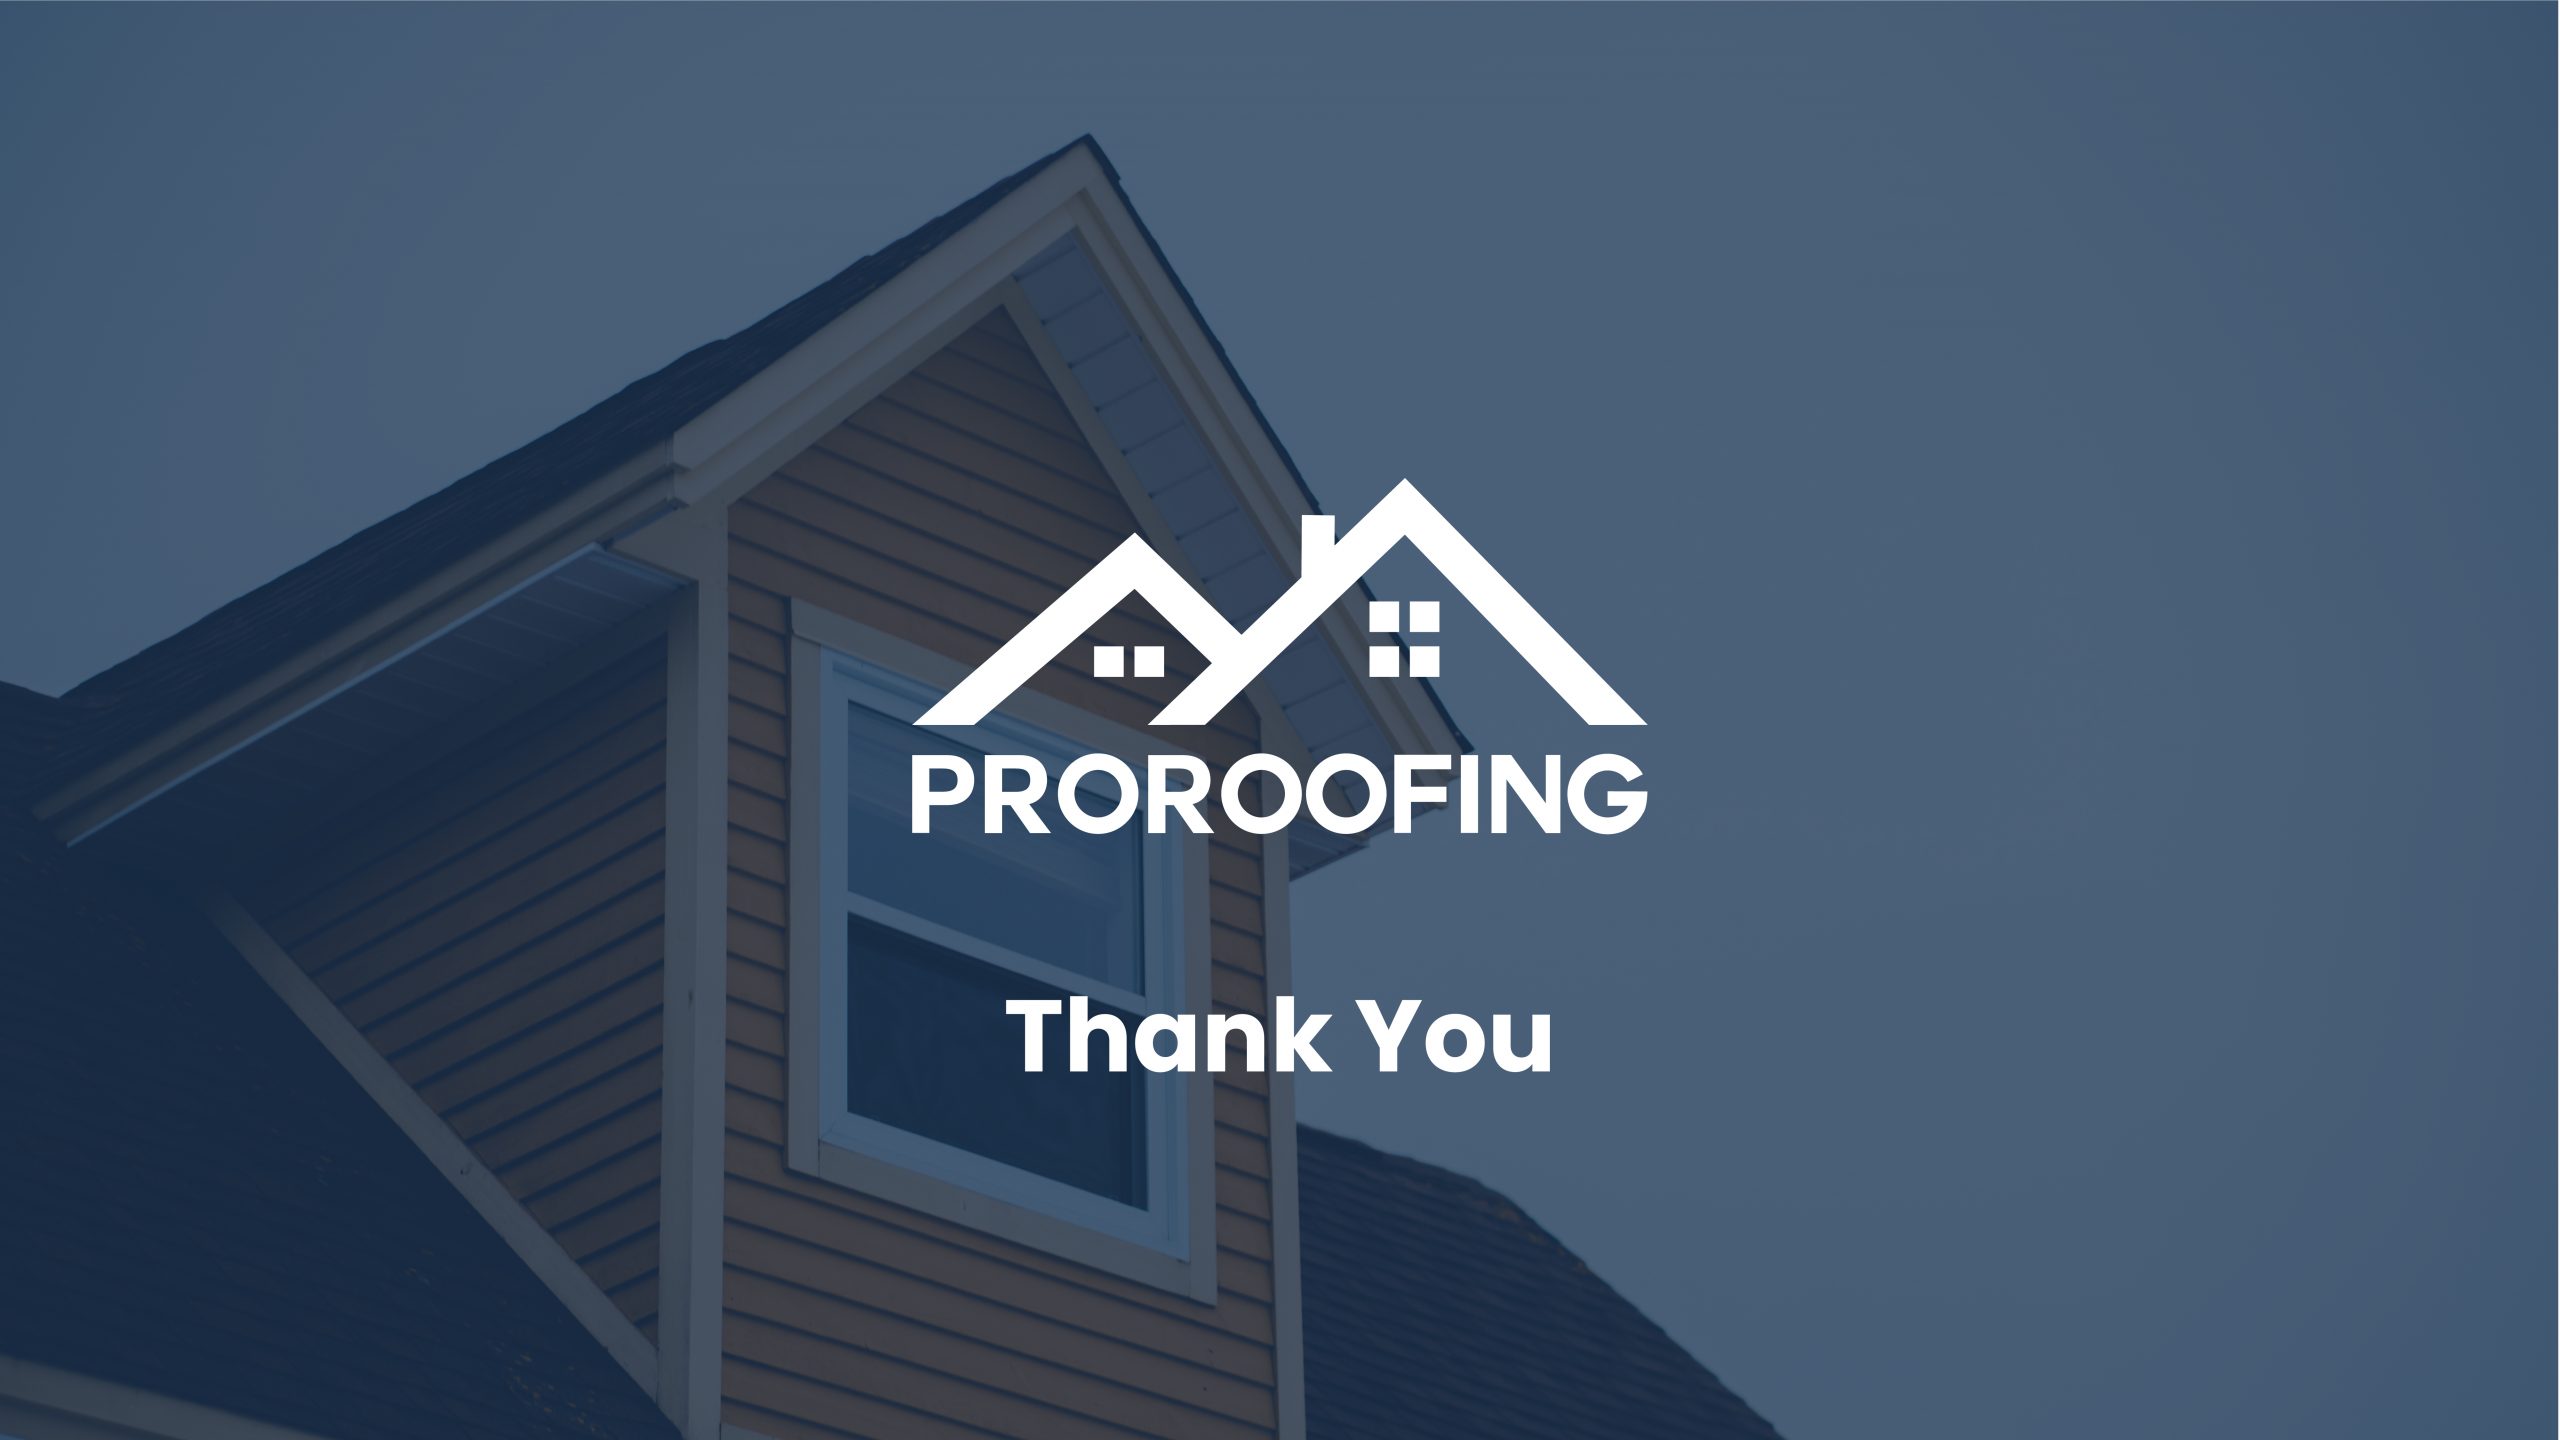 Pro Roofing - Pro roofing Brand Guidelines 29 scaled - New Minds Group